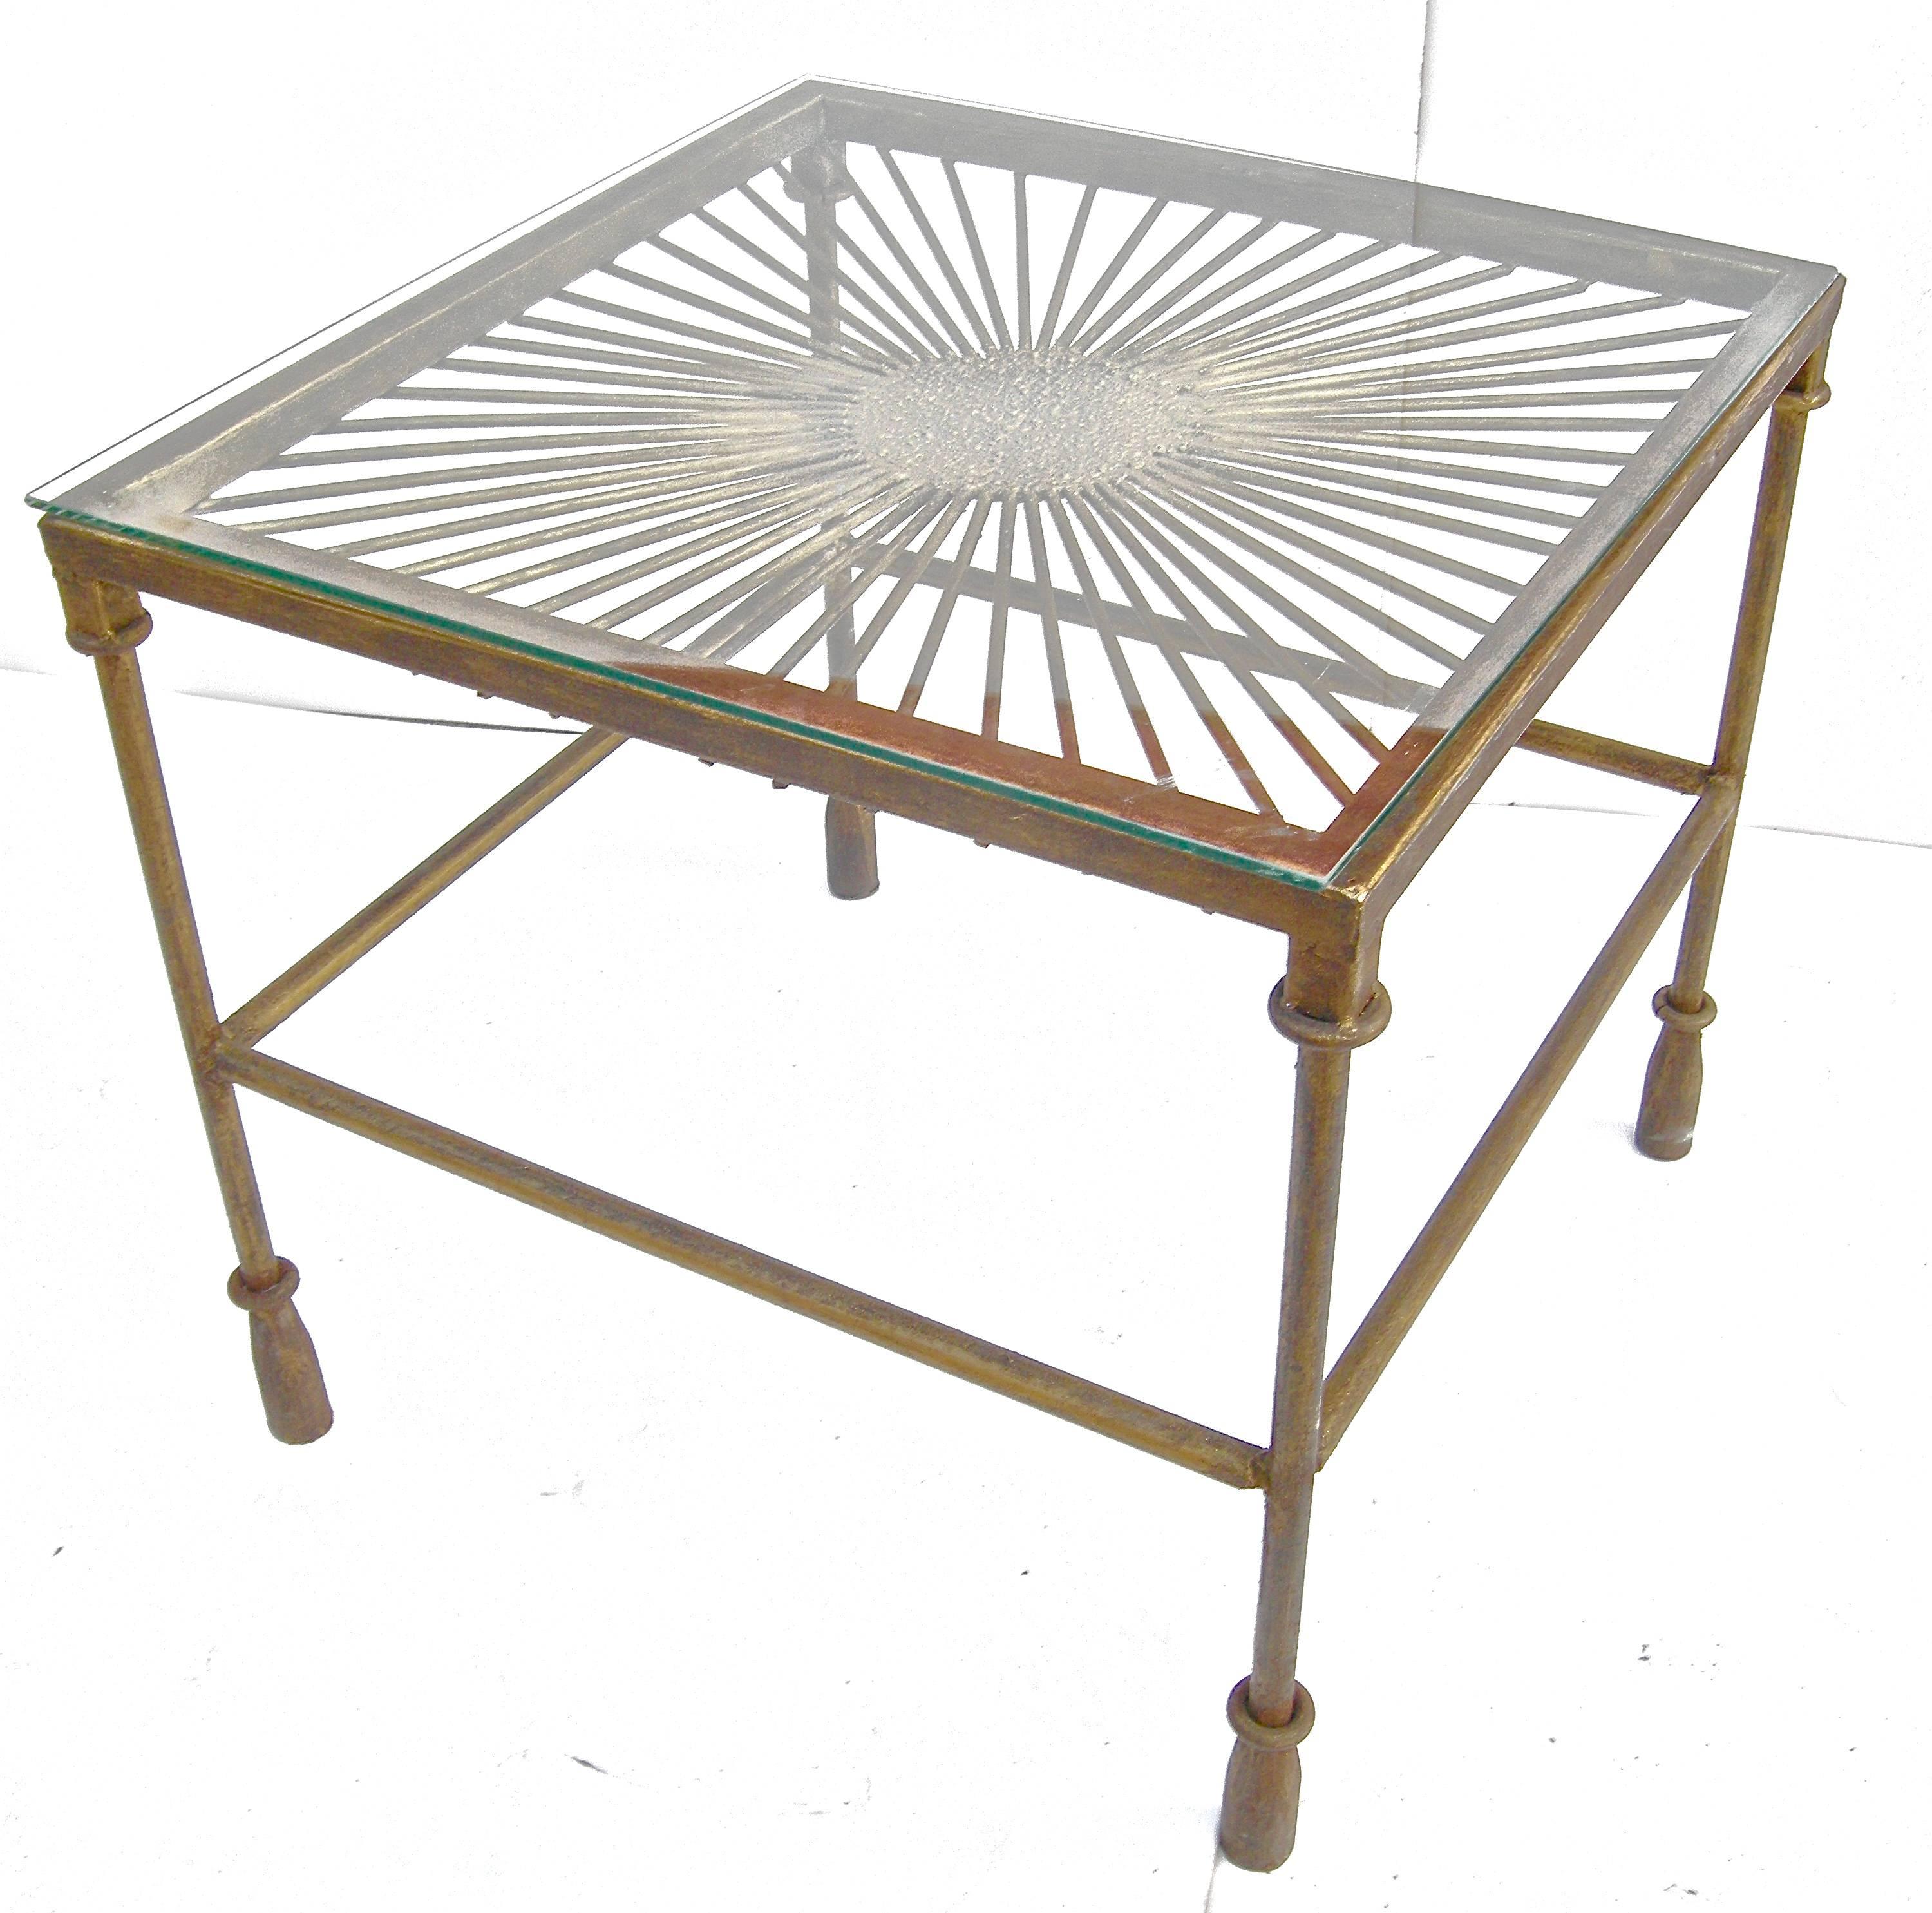 Striking, vintage French, side table in the Brutalist style. Heavy, bronze finished metal with glass top. Spattered centered medallion center top with radiating spoke surface. Square frame resting on moderne French tassle-style feet. Graphic and